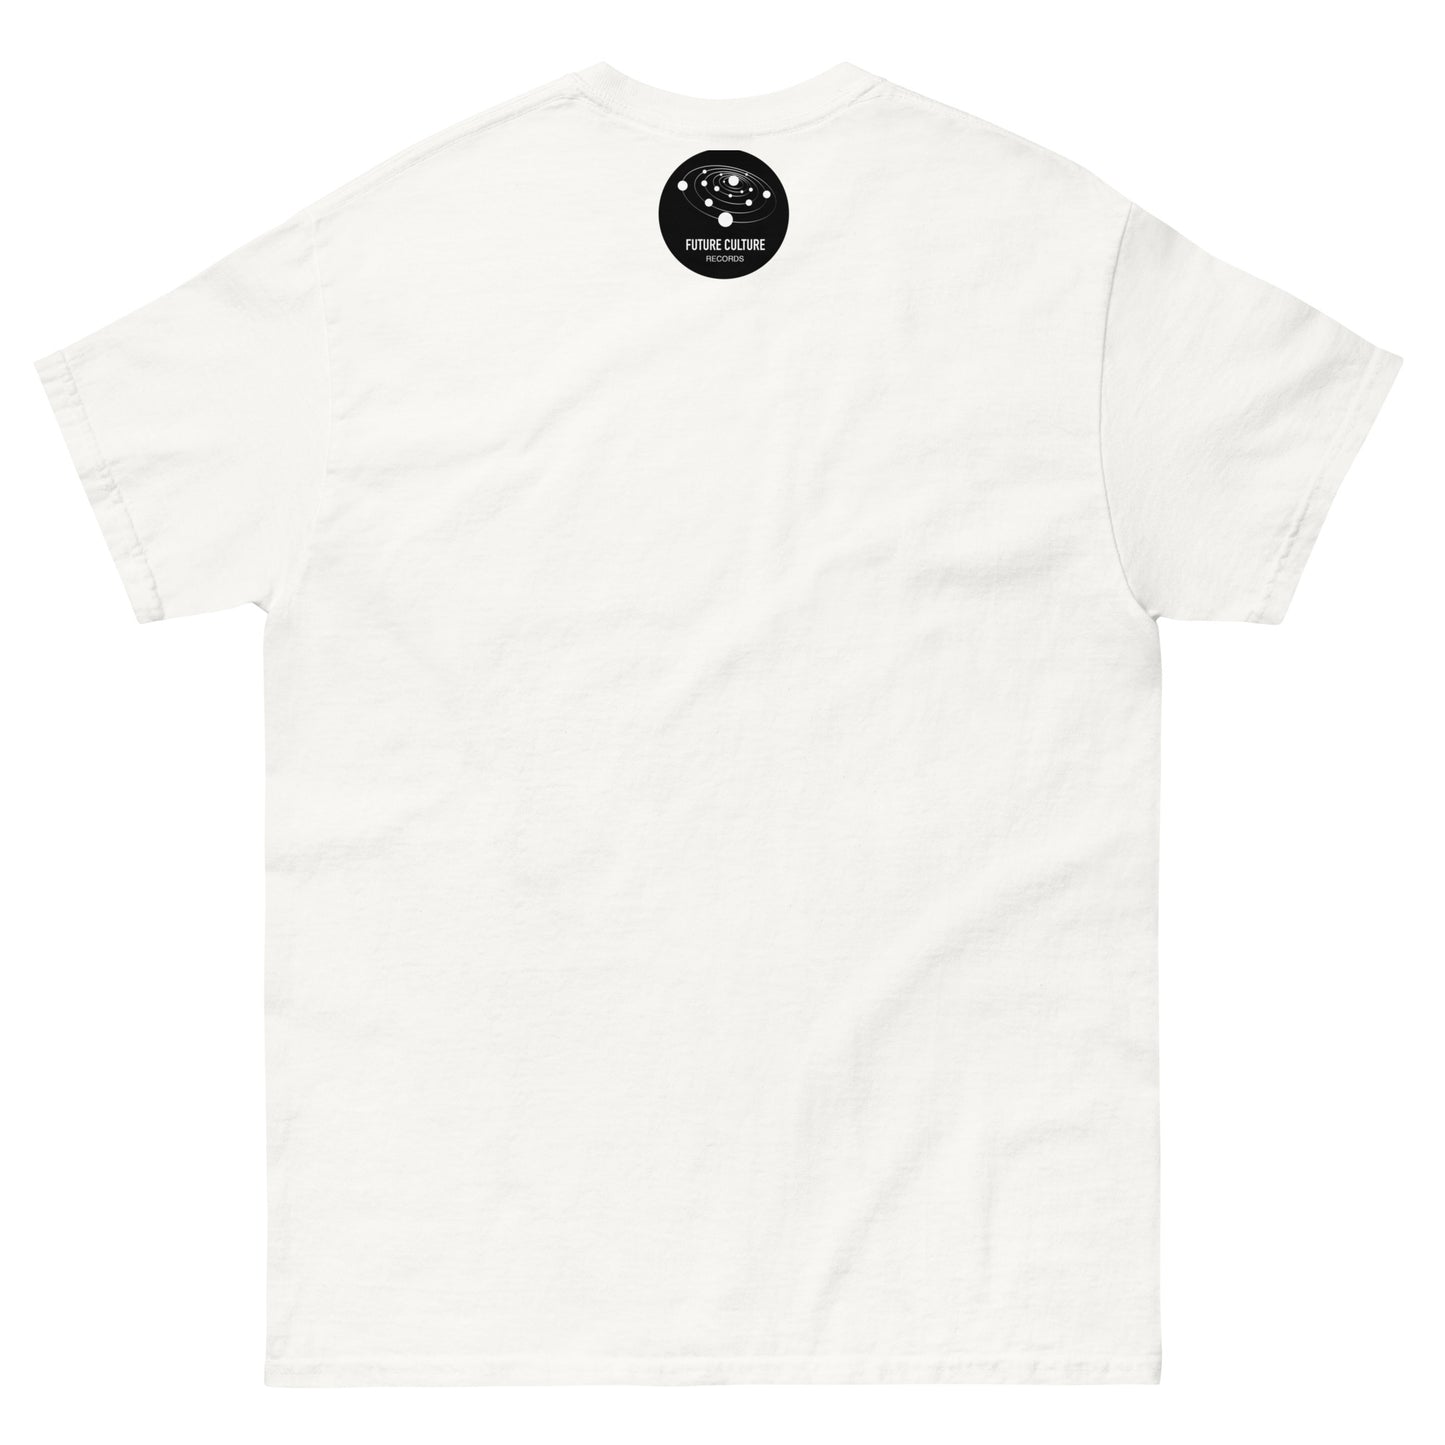 AFTER PARTY T-SHIRT